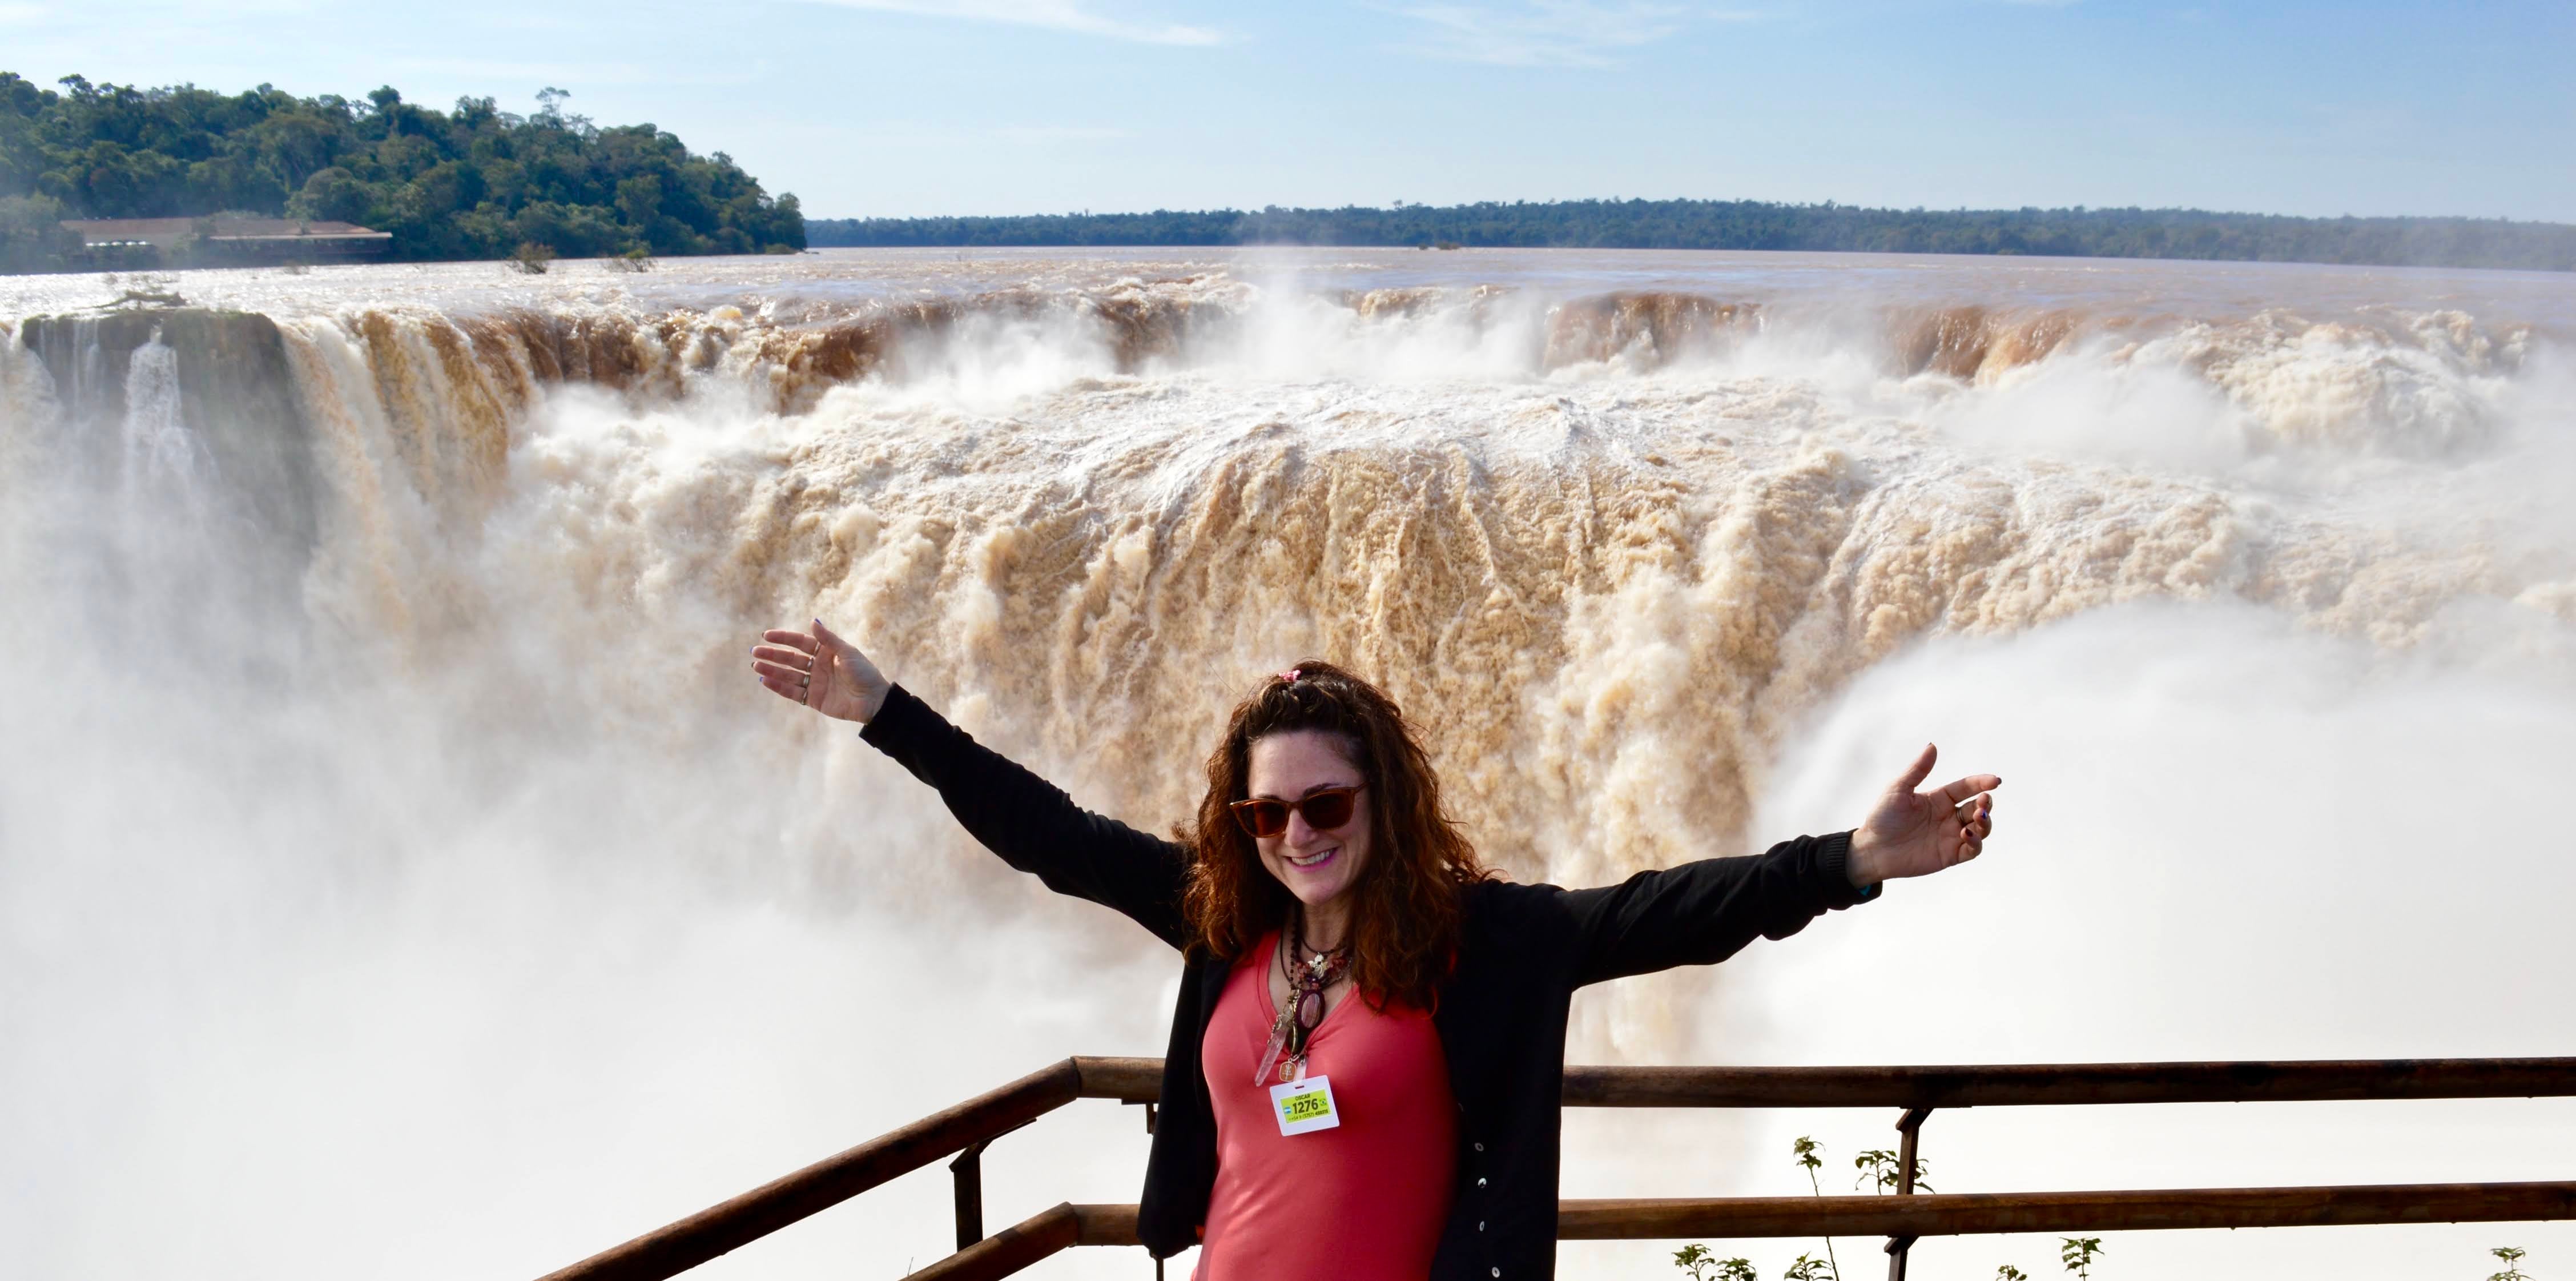 Heather Markel has visited 27 countries across six continents after quitting her job